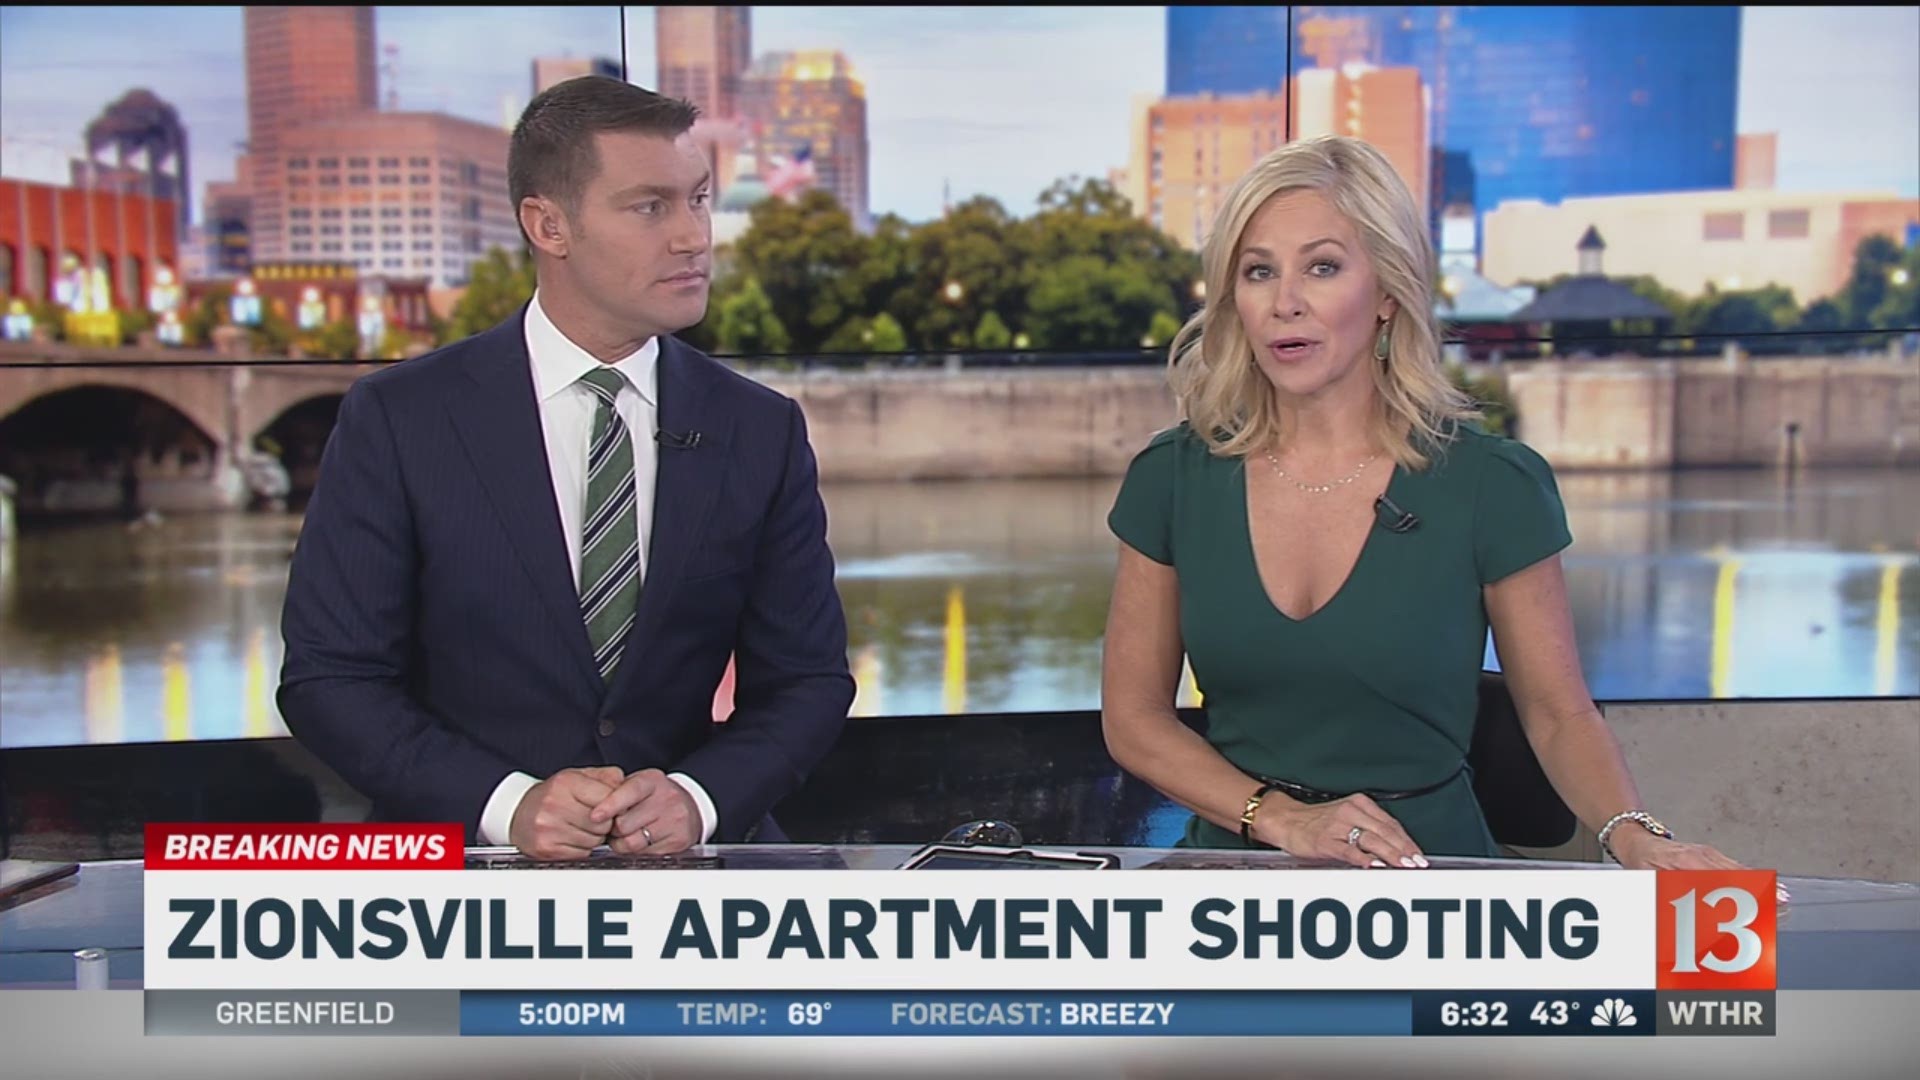 Zionsville Apartment Shooting 6:30